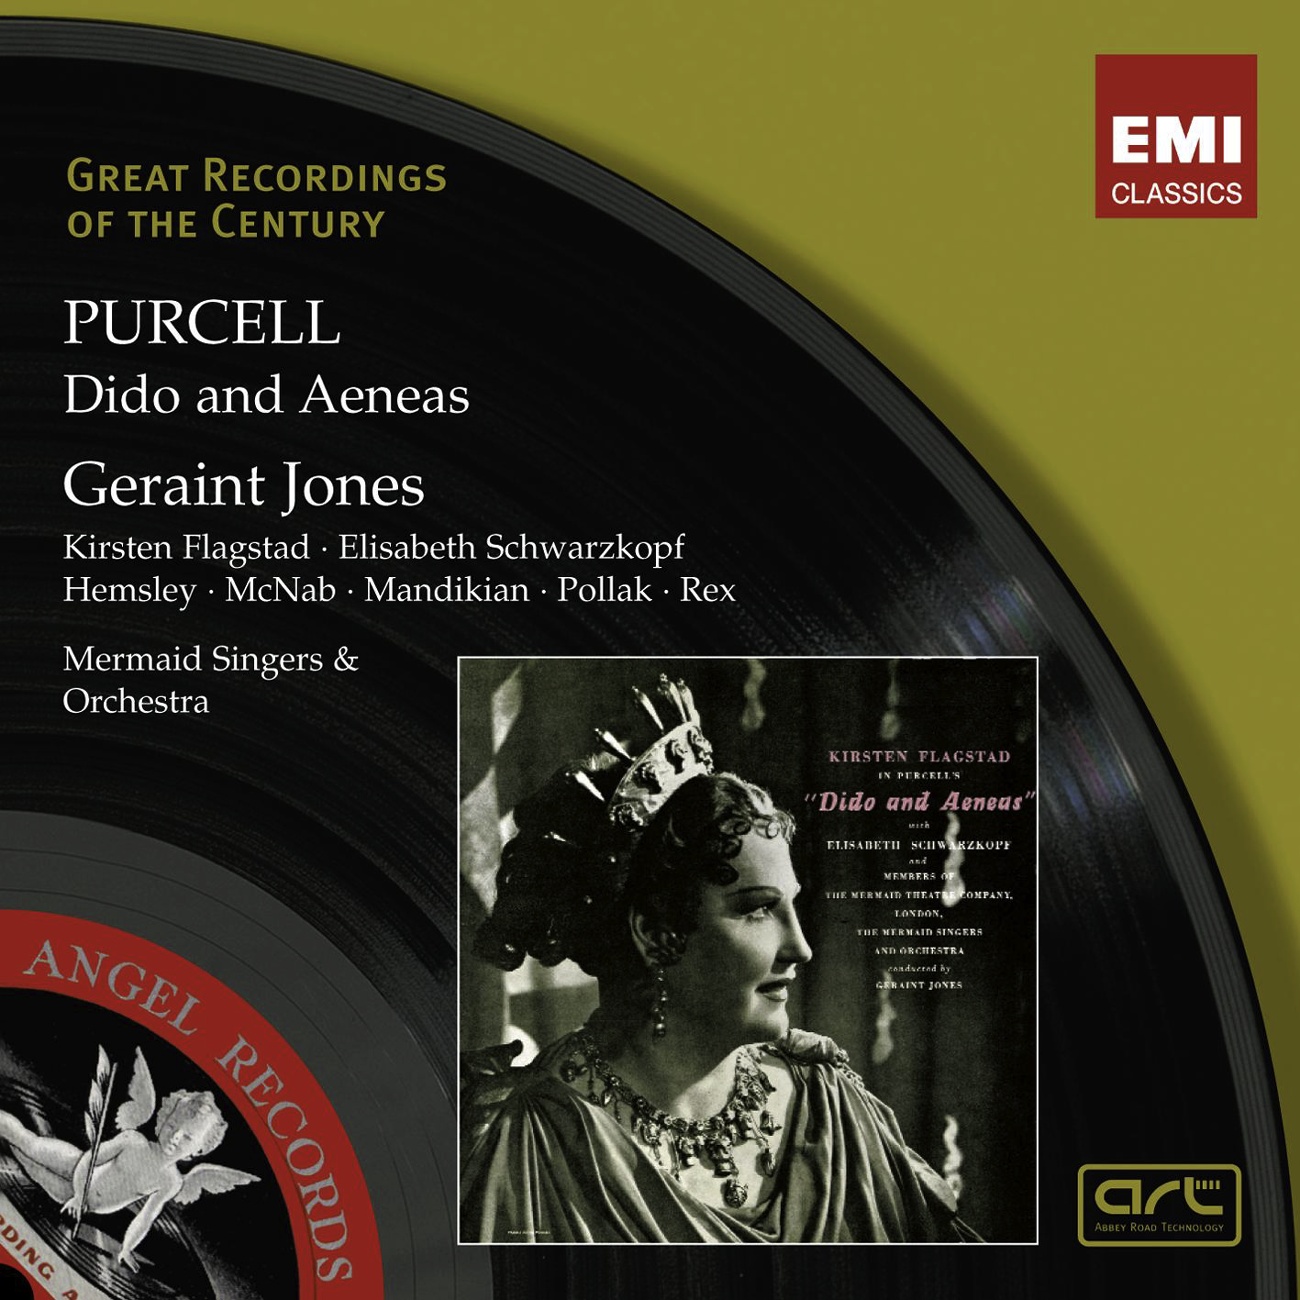 Dido and Aeneas Z626 (ed. Geraint Jones) (2008 Remastered Version), ACT 3, Scene 1: The Sailors' Dance (Orchestra)